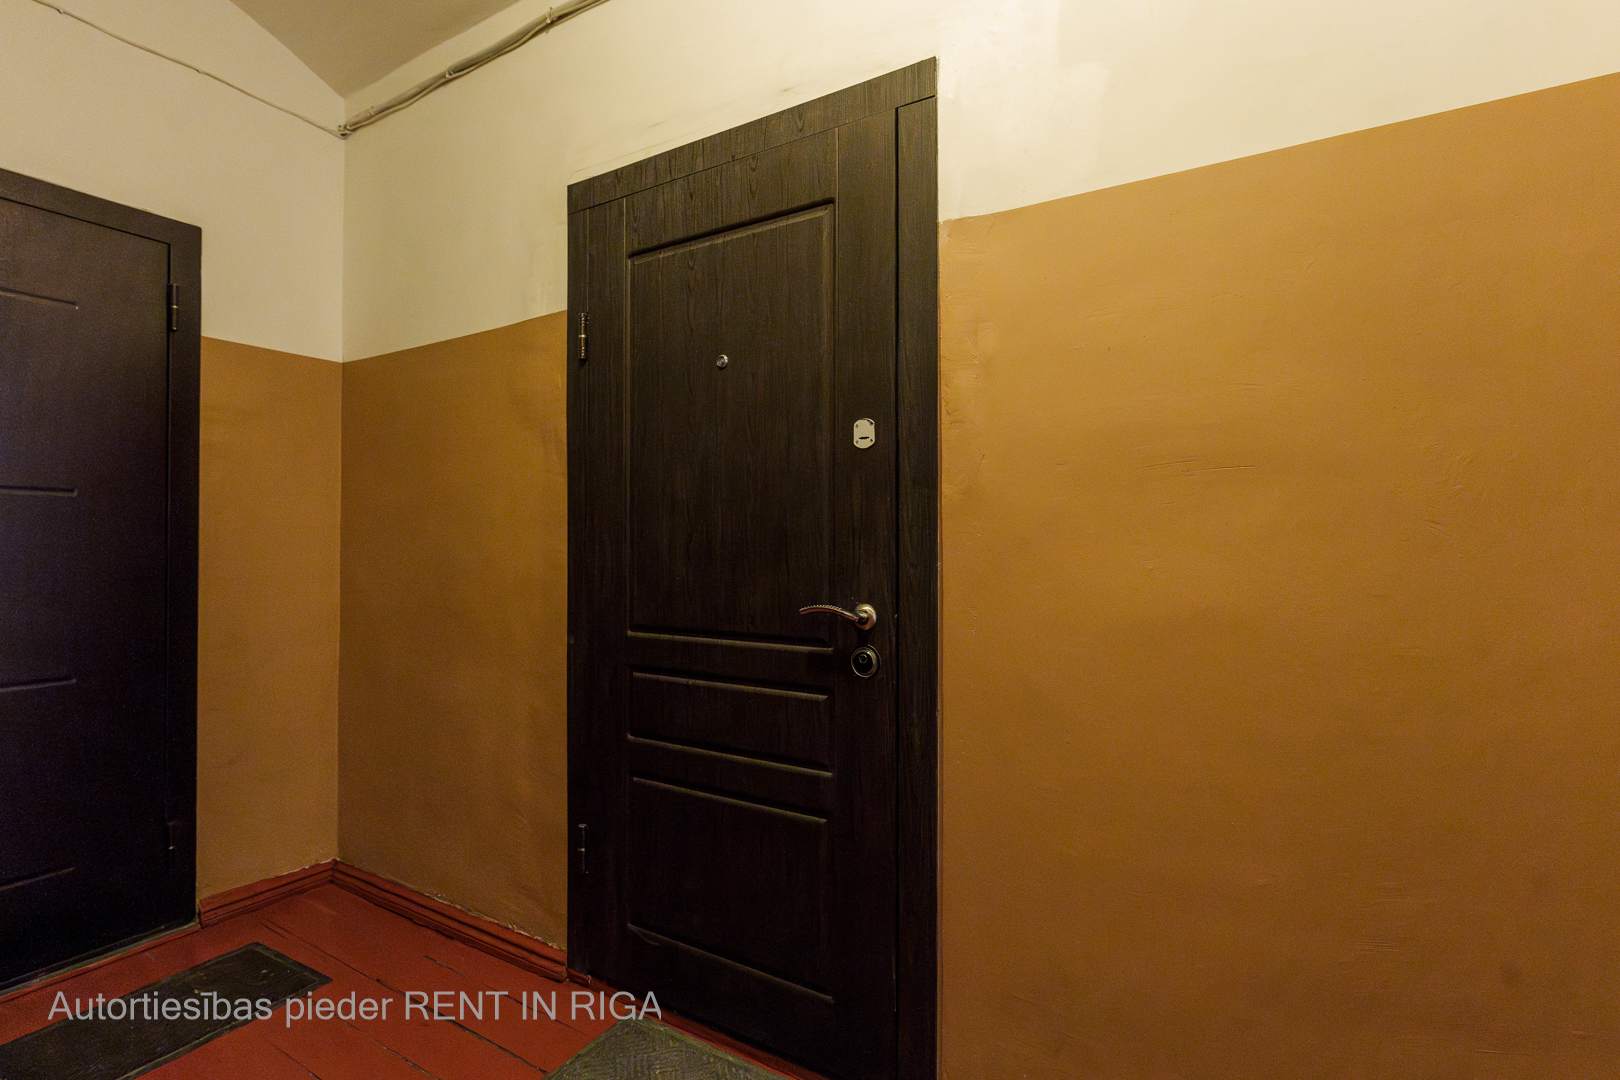 Apartment for sale, Melnsila street 9 - Image 1